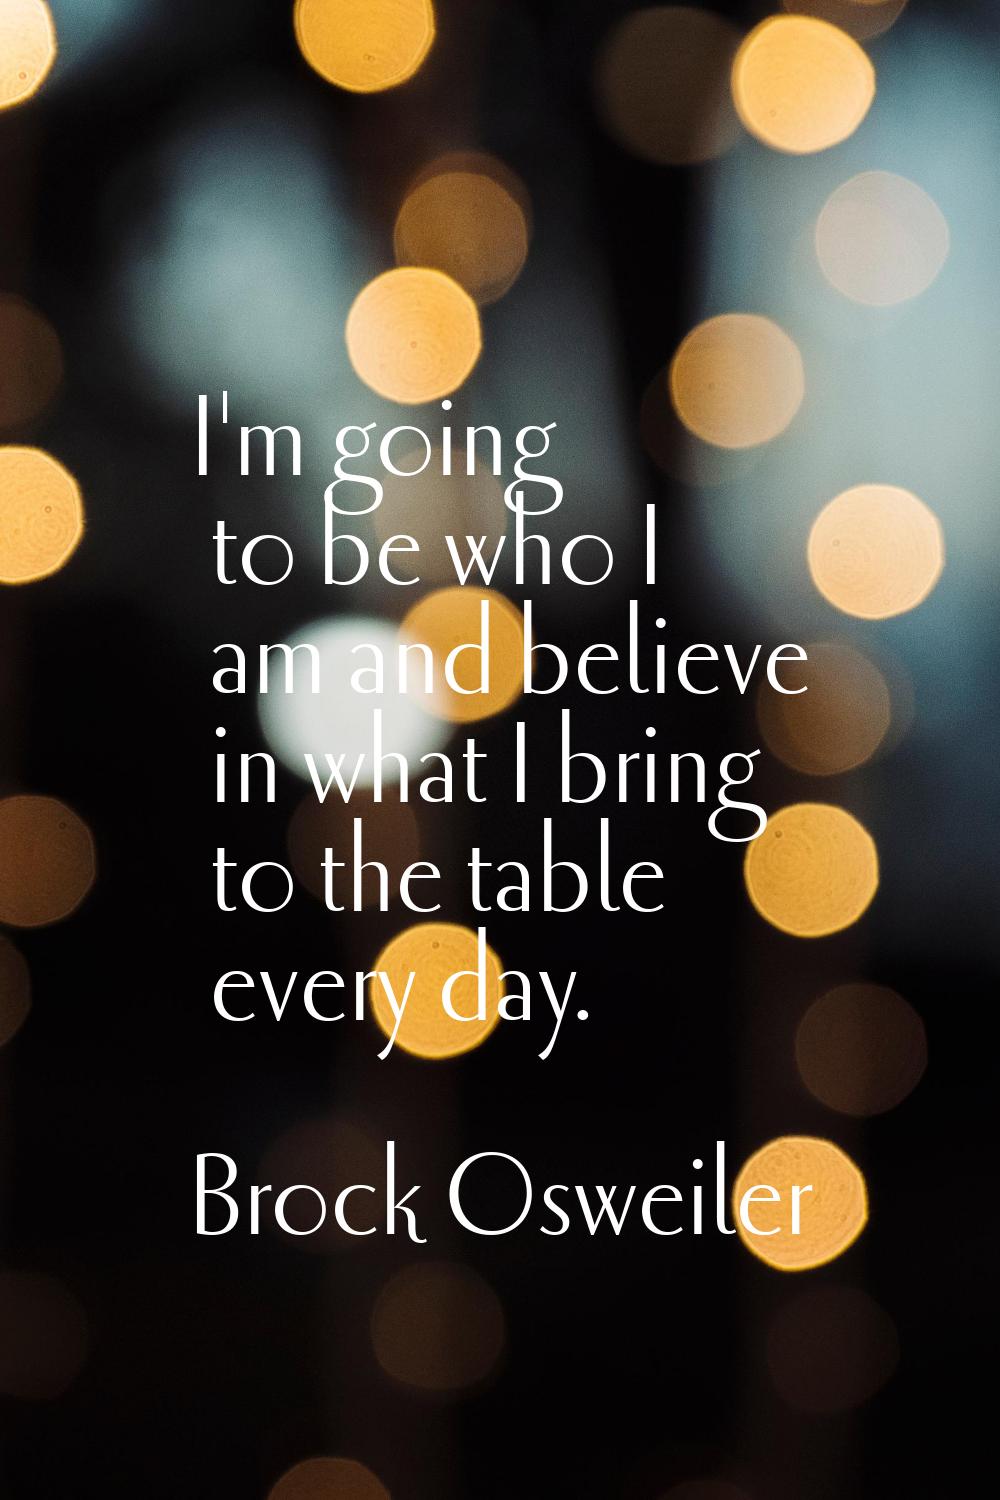 I'm going to be who I am and believe in what I bring to the table every day.